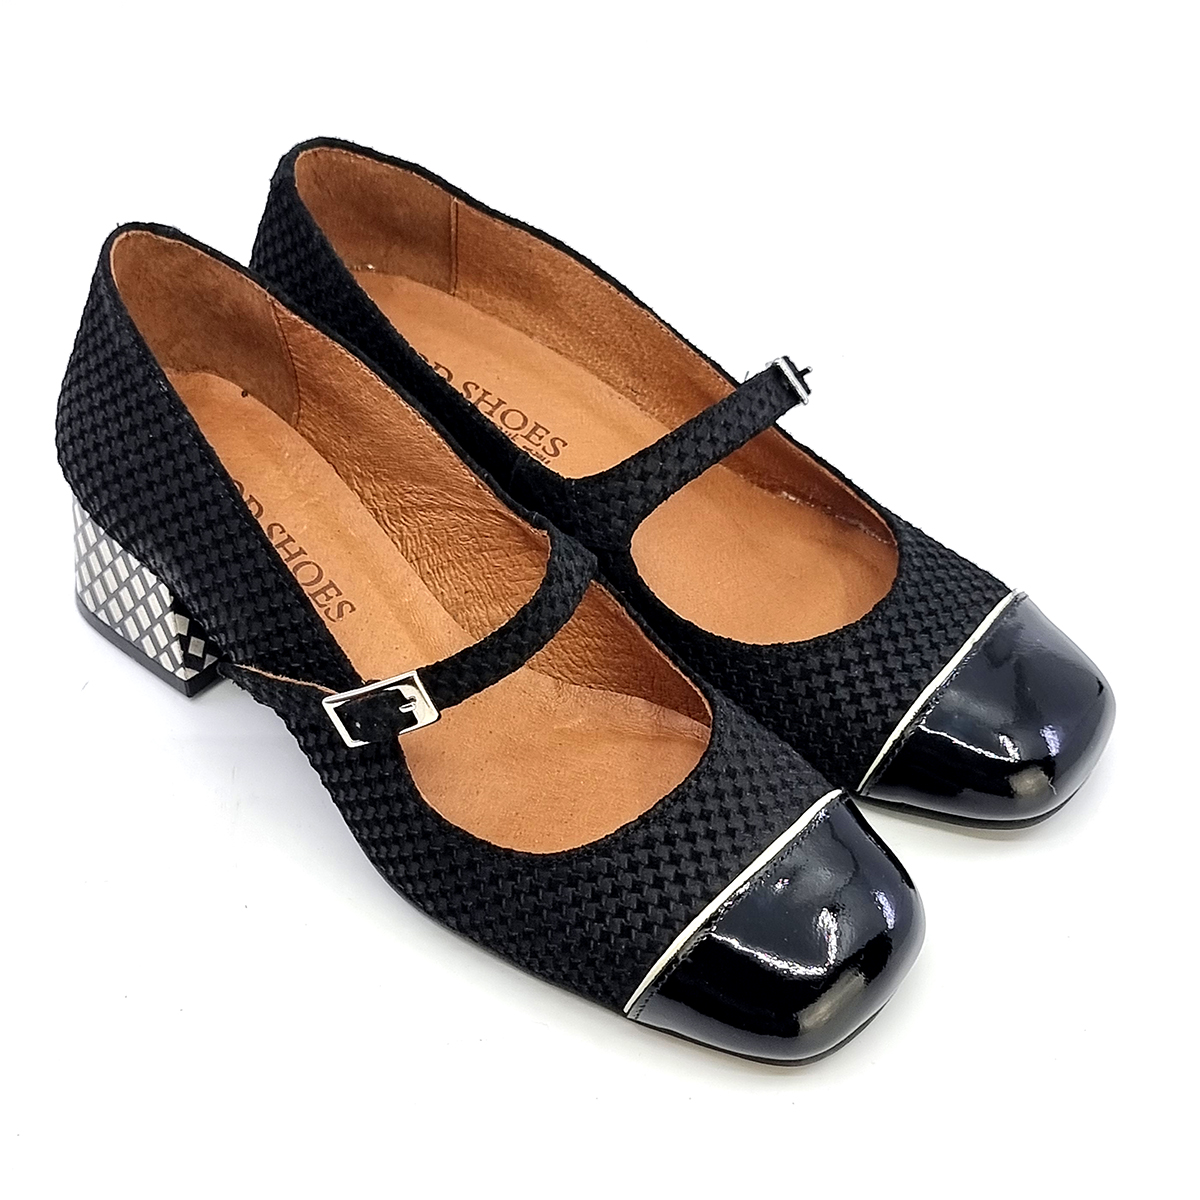 The Vanessa - Ladies Retro Style Shoe by Mod Shoes